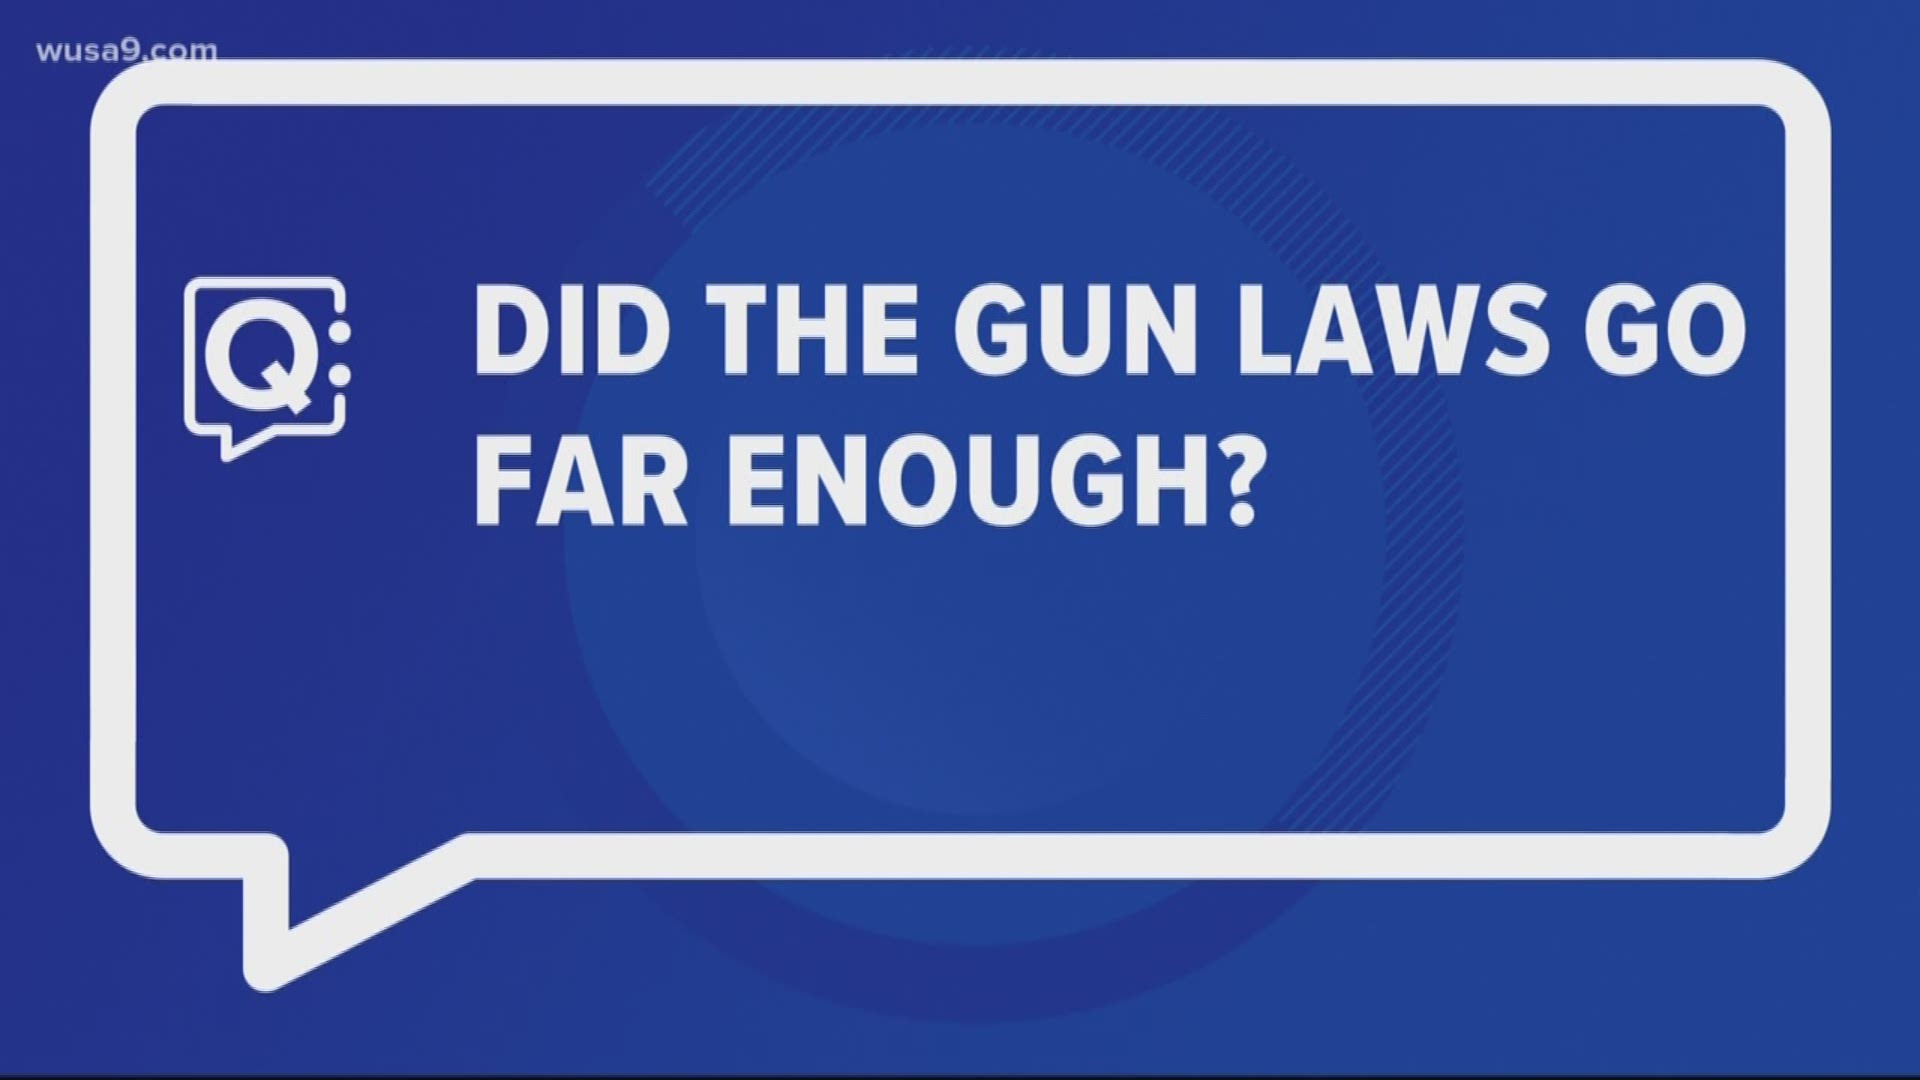 Bruce is joined by a legal analyst to answer questions about the new Virginia gun laws and their impact.